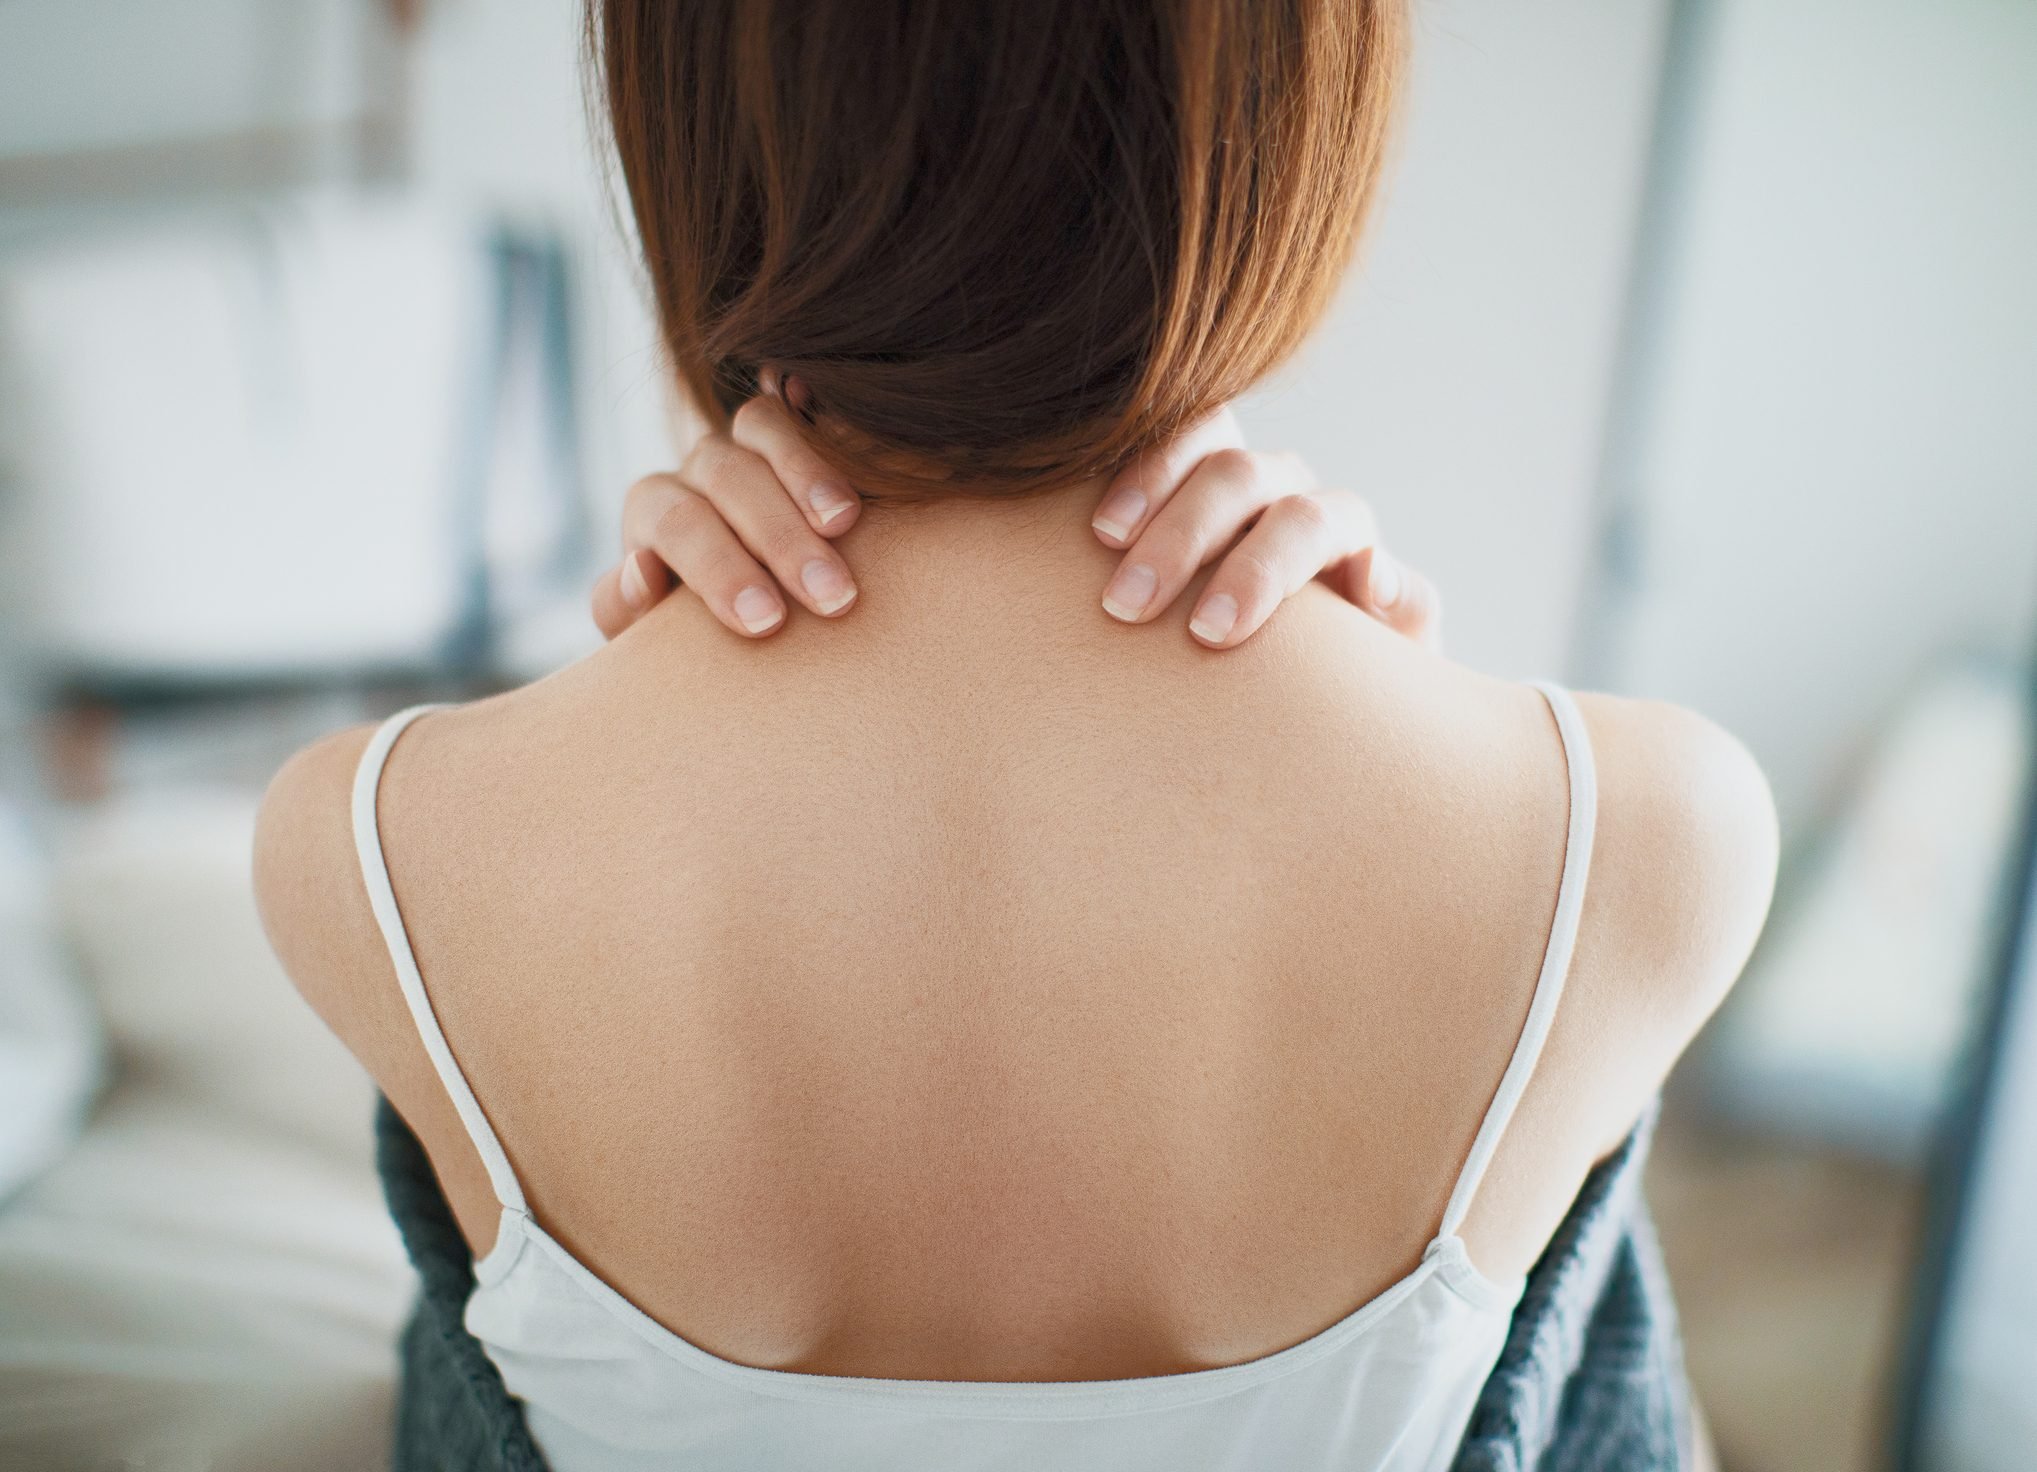 9 Surprising Ways Bad Posture Can Mess With Your Health